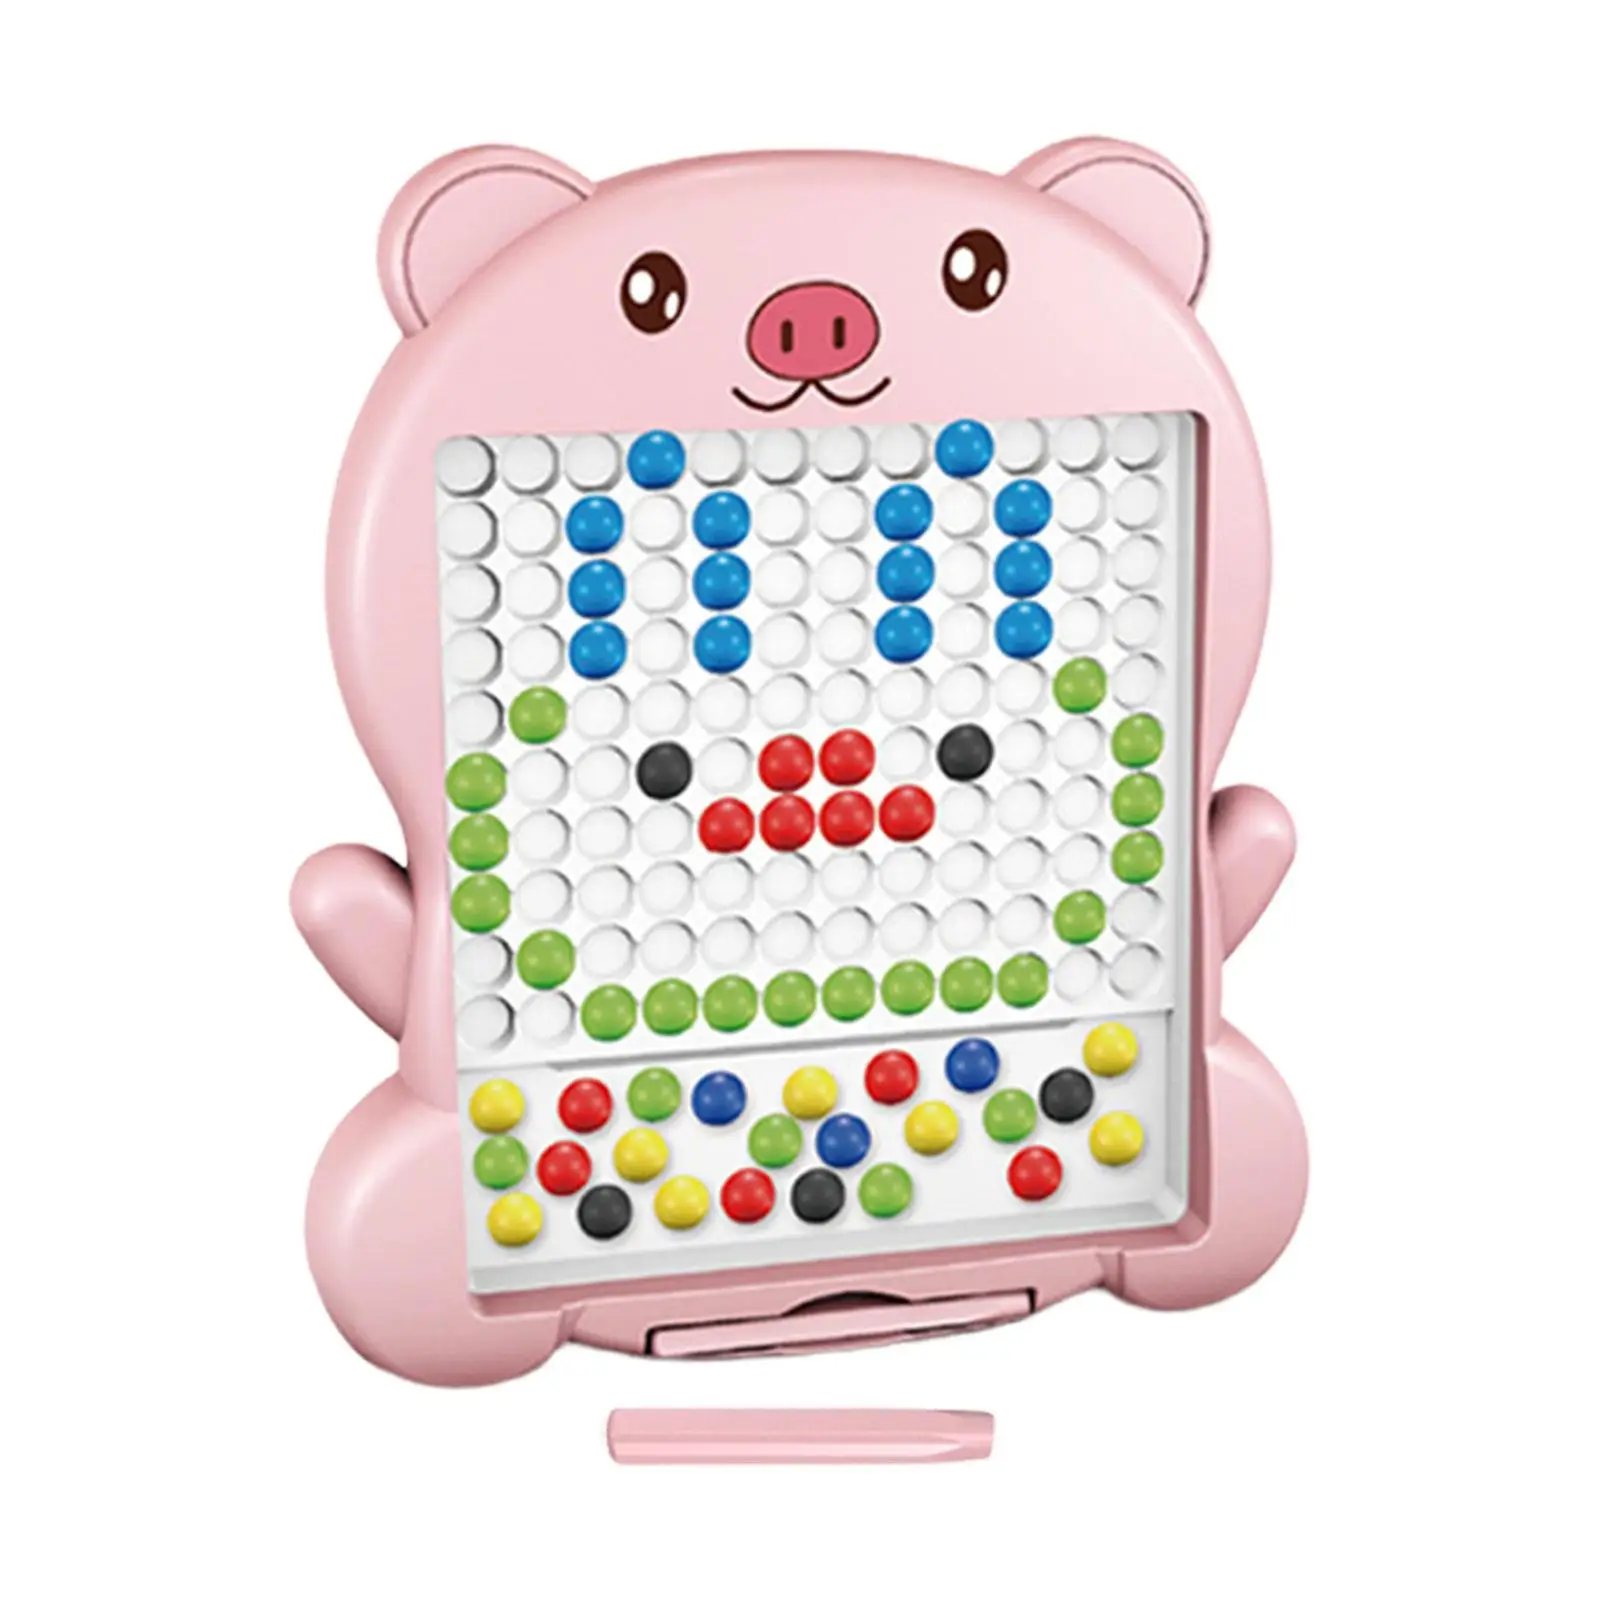 Drawing Board Color Recognition 20 Flash Cards Doodle Board Dot Bead Game for Boys Preschool Children Toddlers Birthday Gift